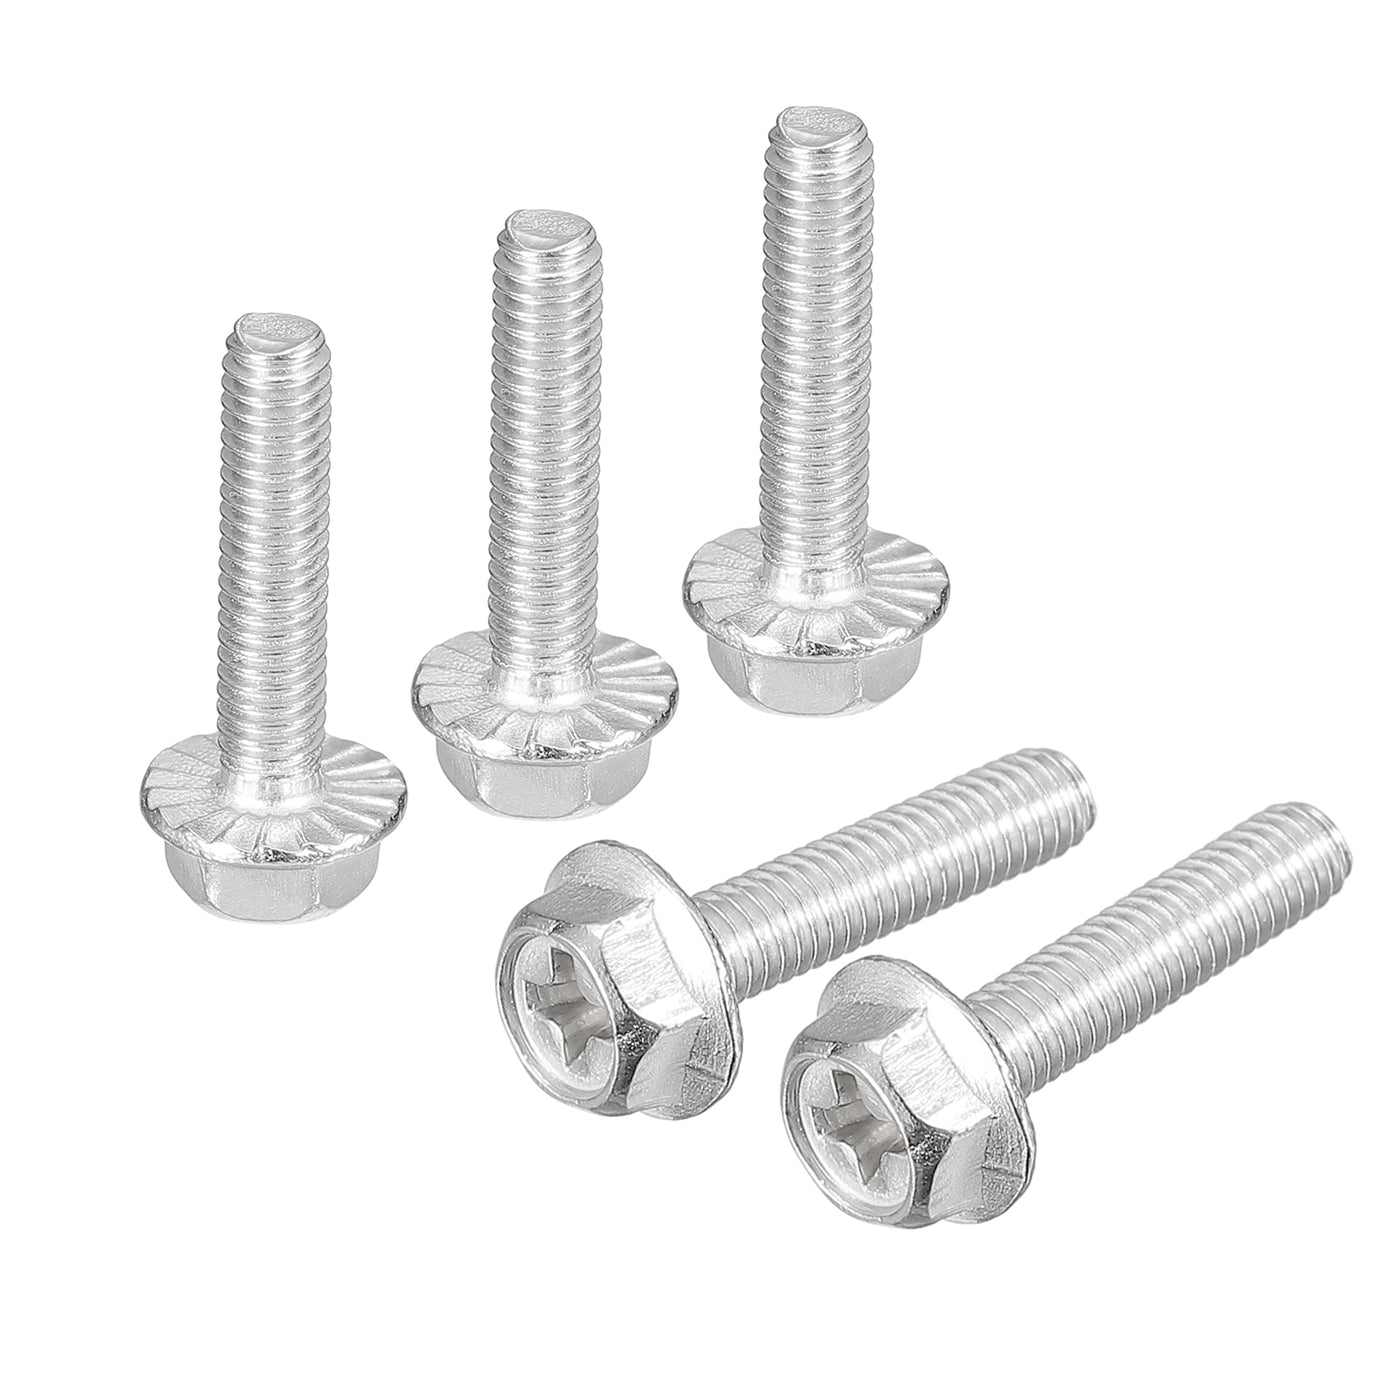 uxcell Uxcell M4x18mm Phillips Hex Head Flange Bolts, 10pcs 304 Stainless Steel Screws